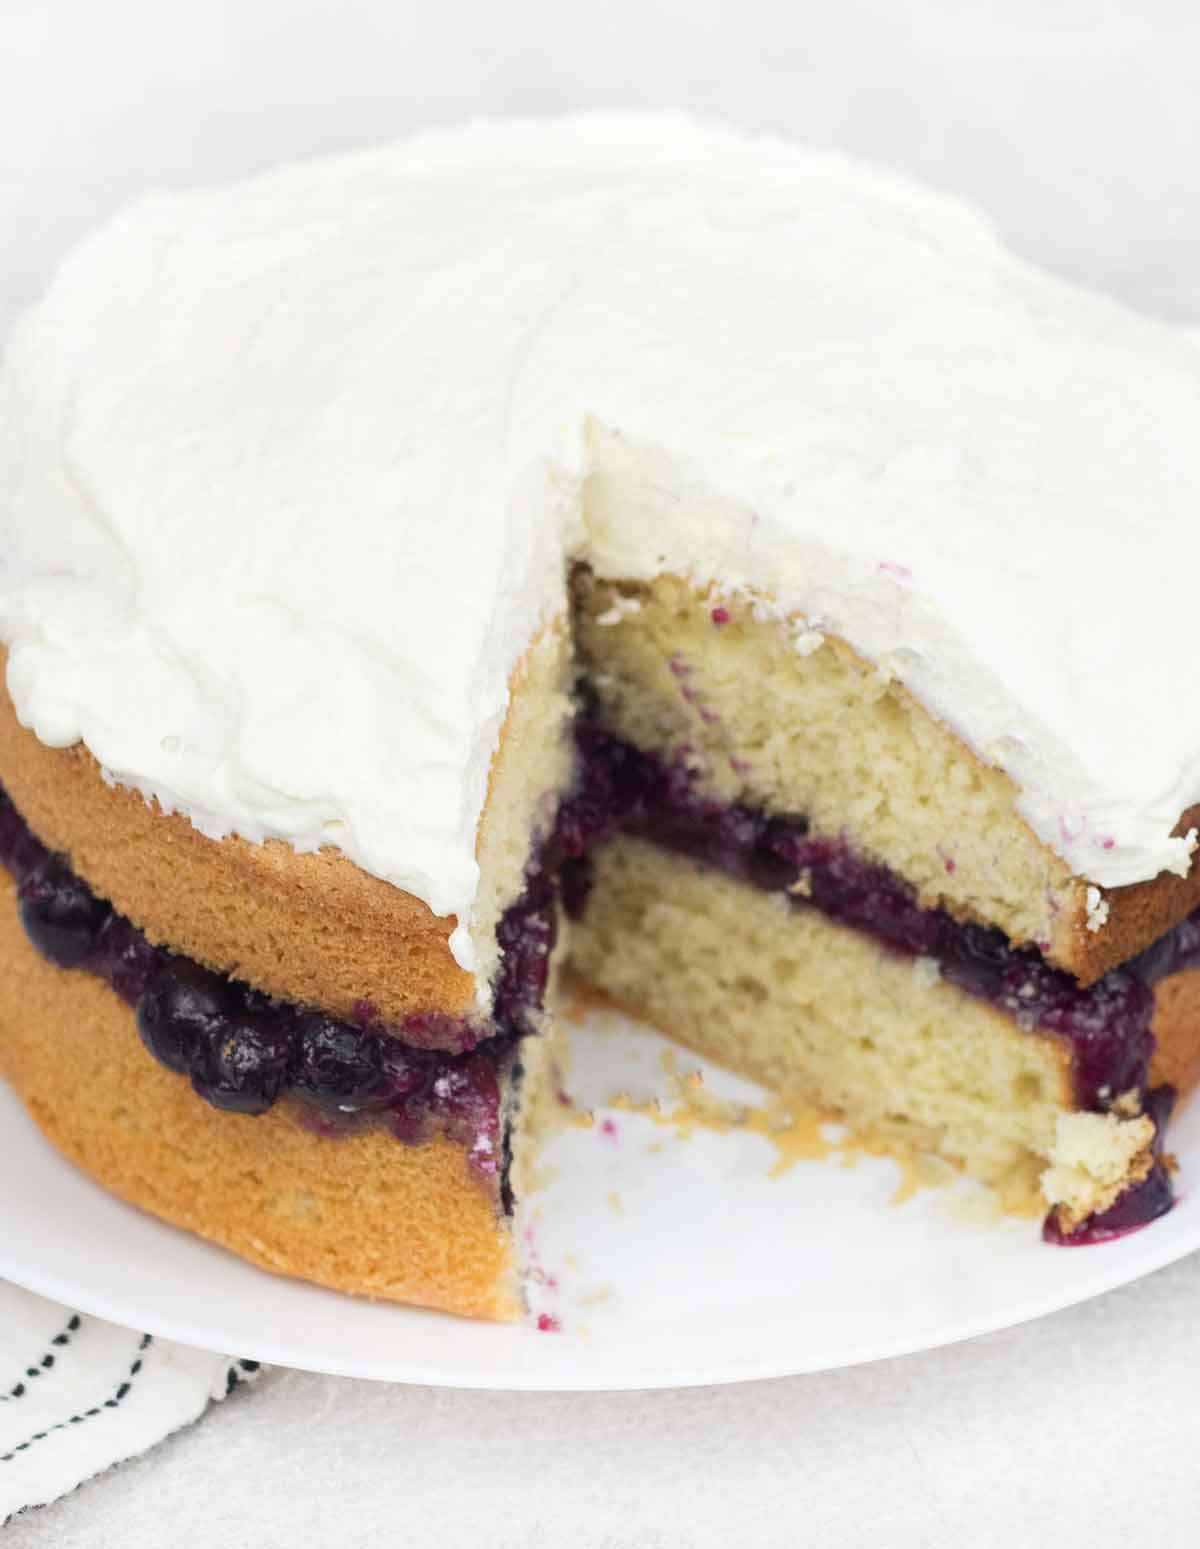 2 layers cake stuffed with blueberry cake filling and topped with whipped cream.